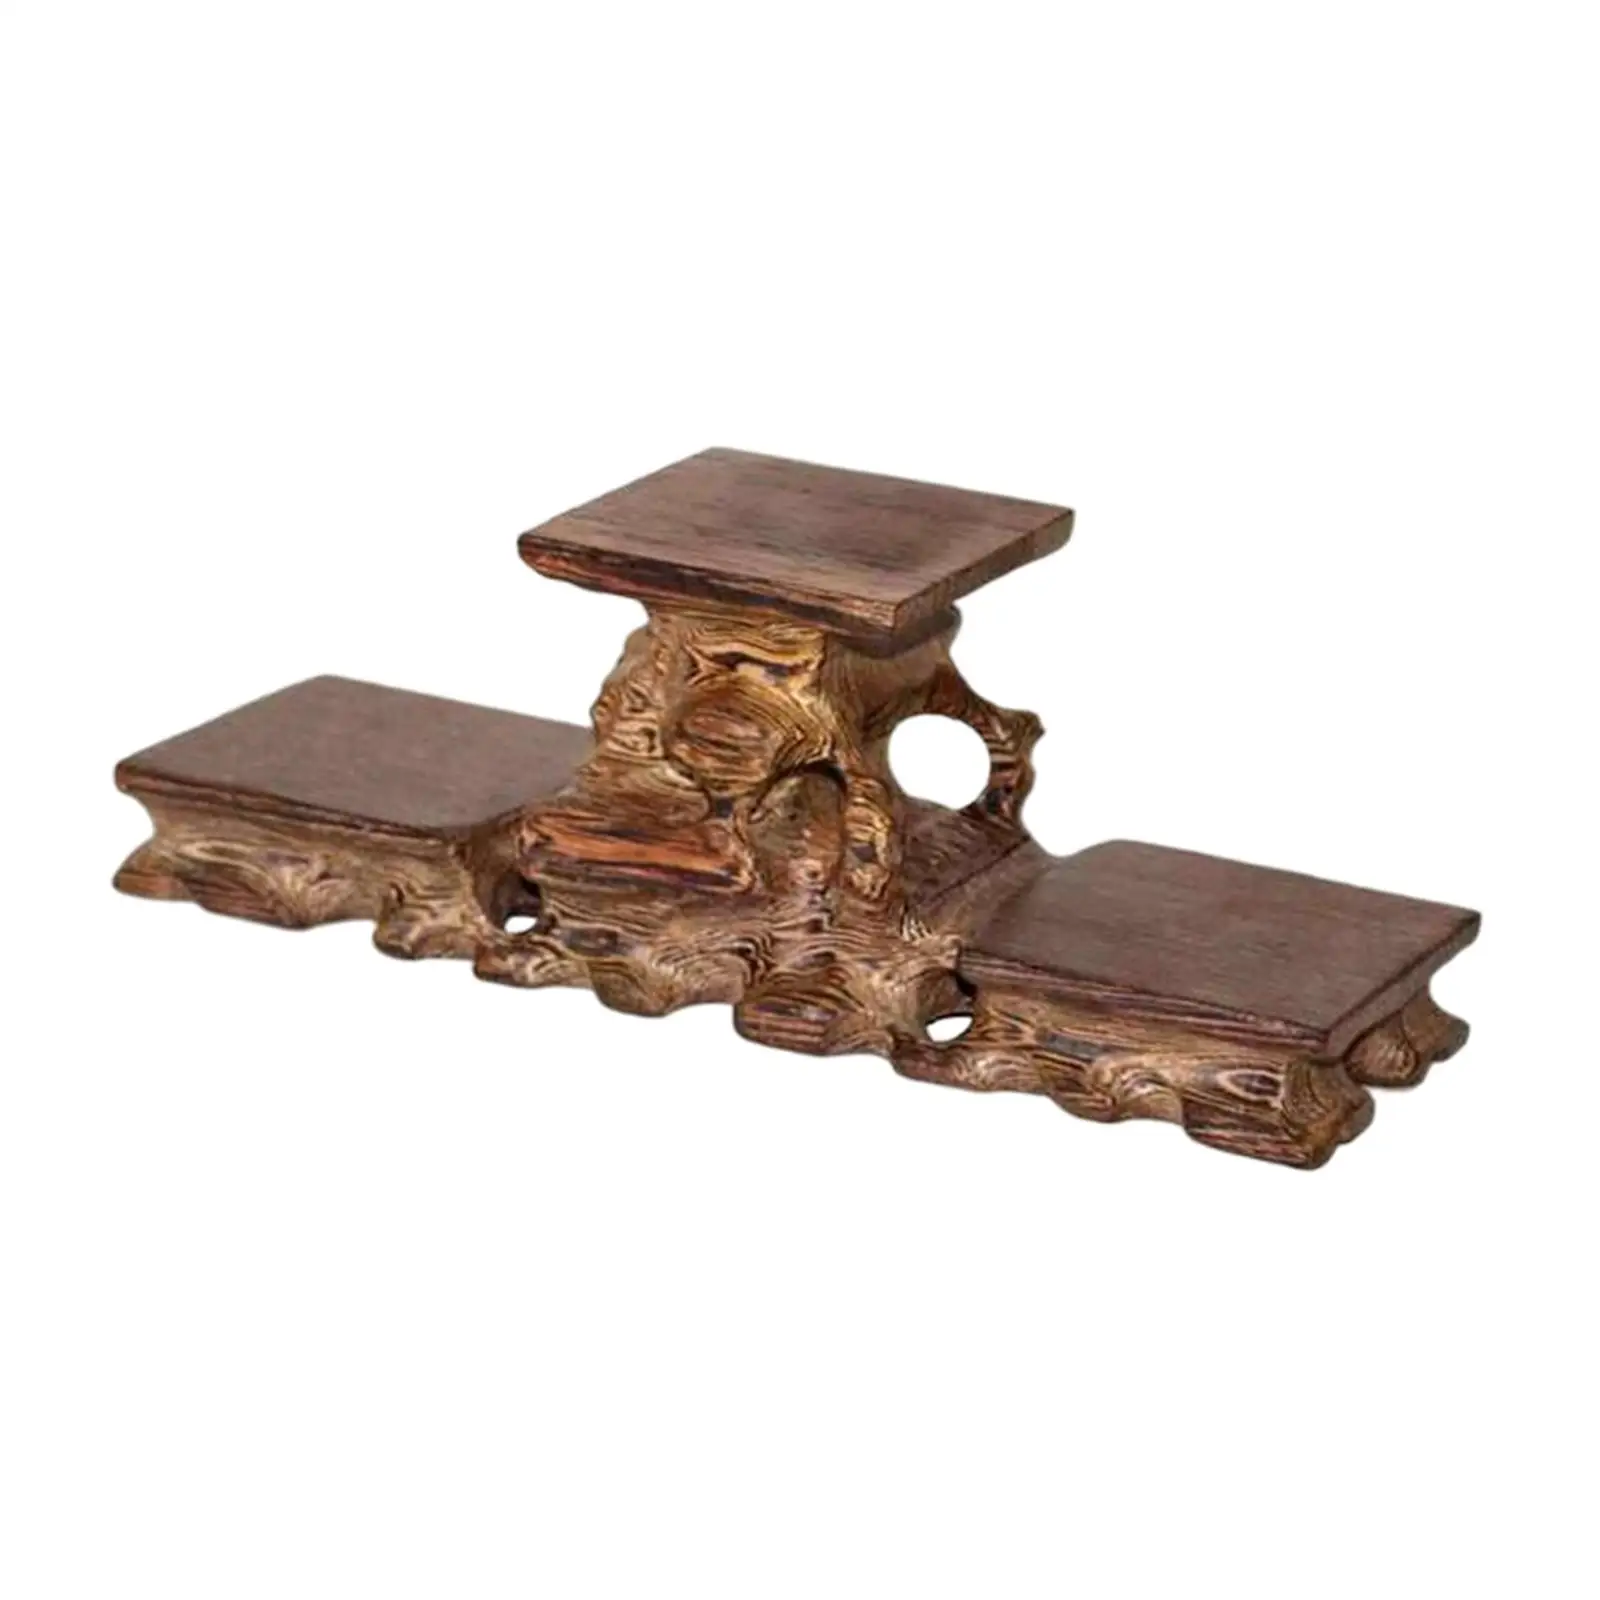 Wooden Stone Display Base Ornaments Display Stand for Photography Props Home